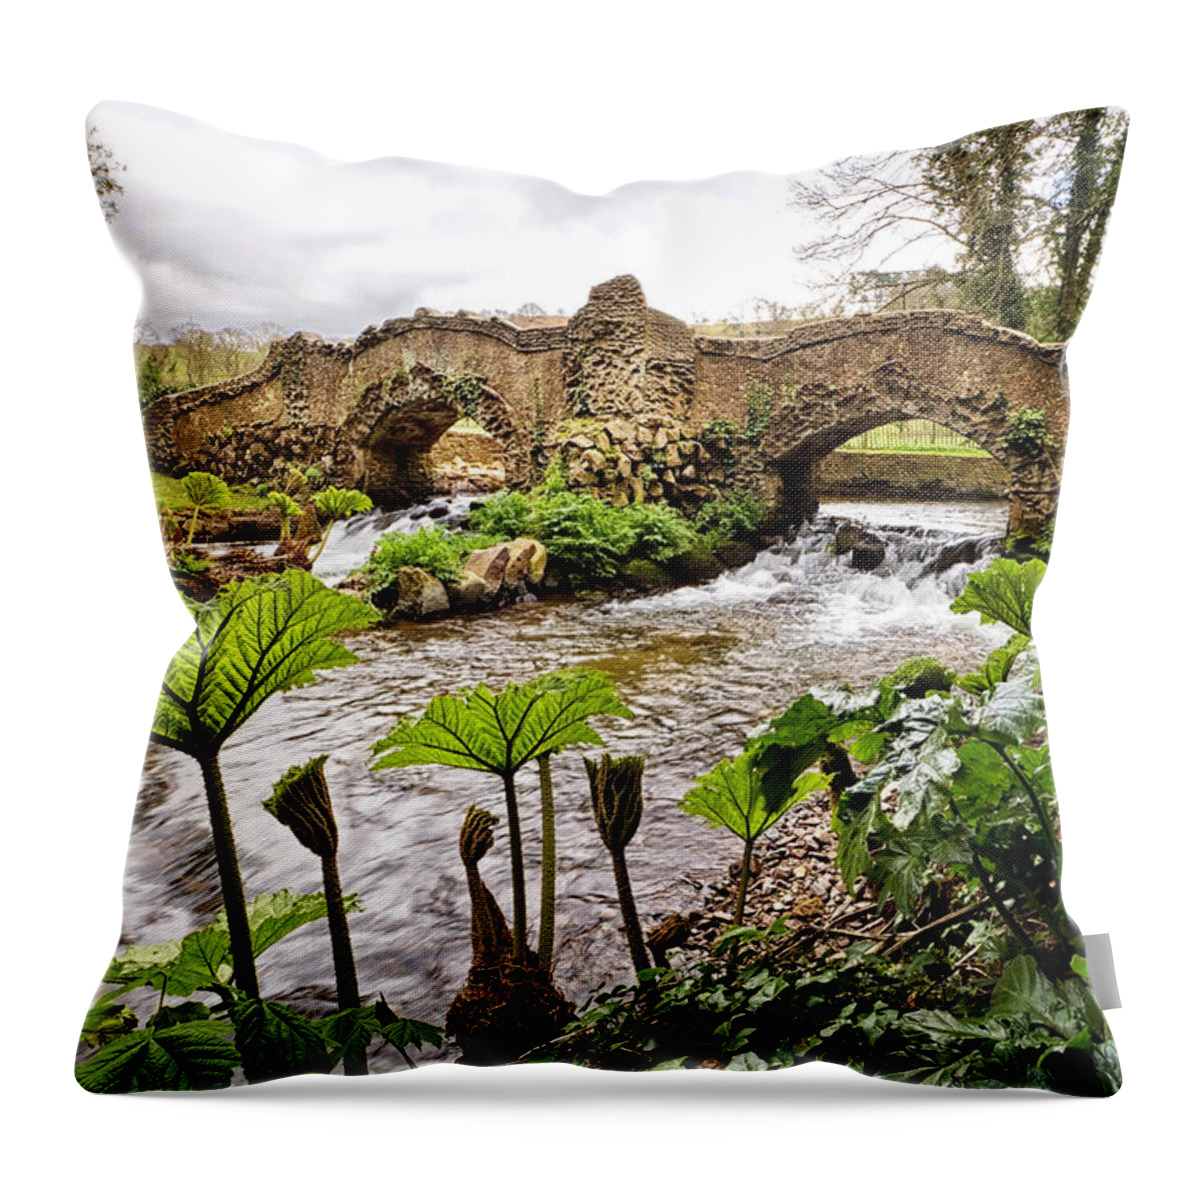 Dunster Throw Pillow featuring the photograph Castle Mill Bridge by Shirley Mitchell